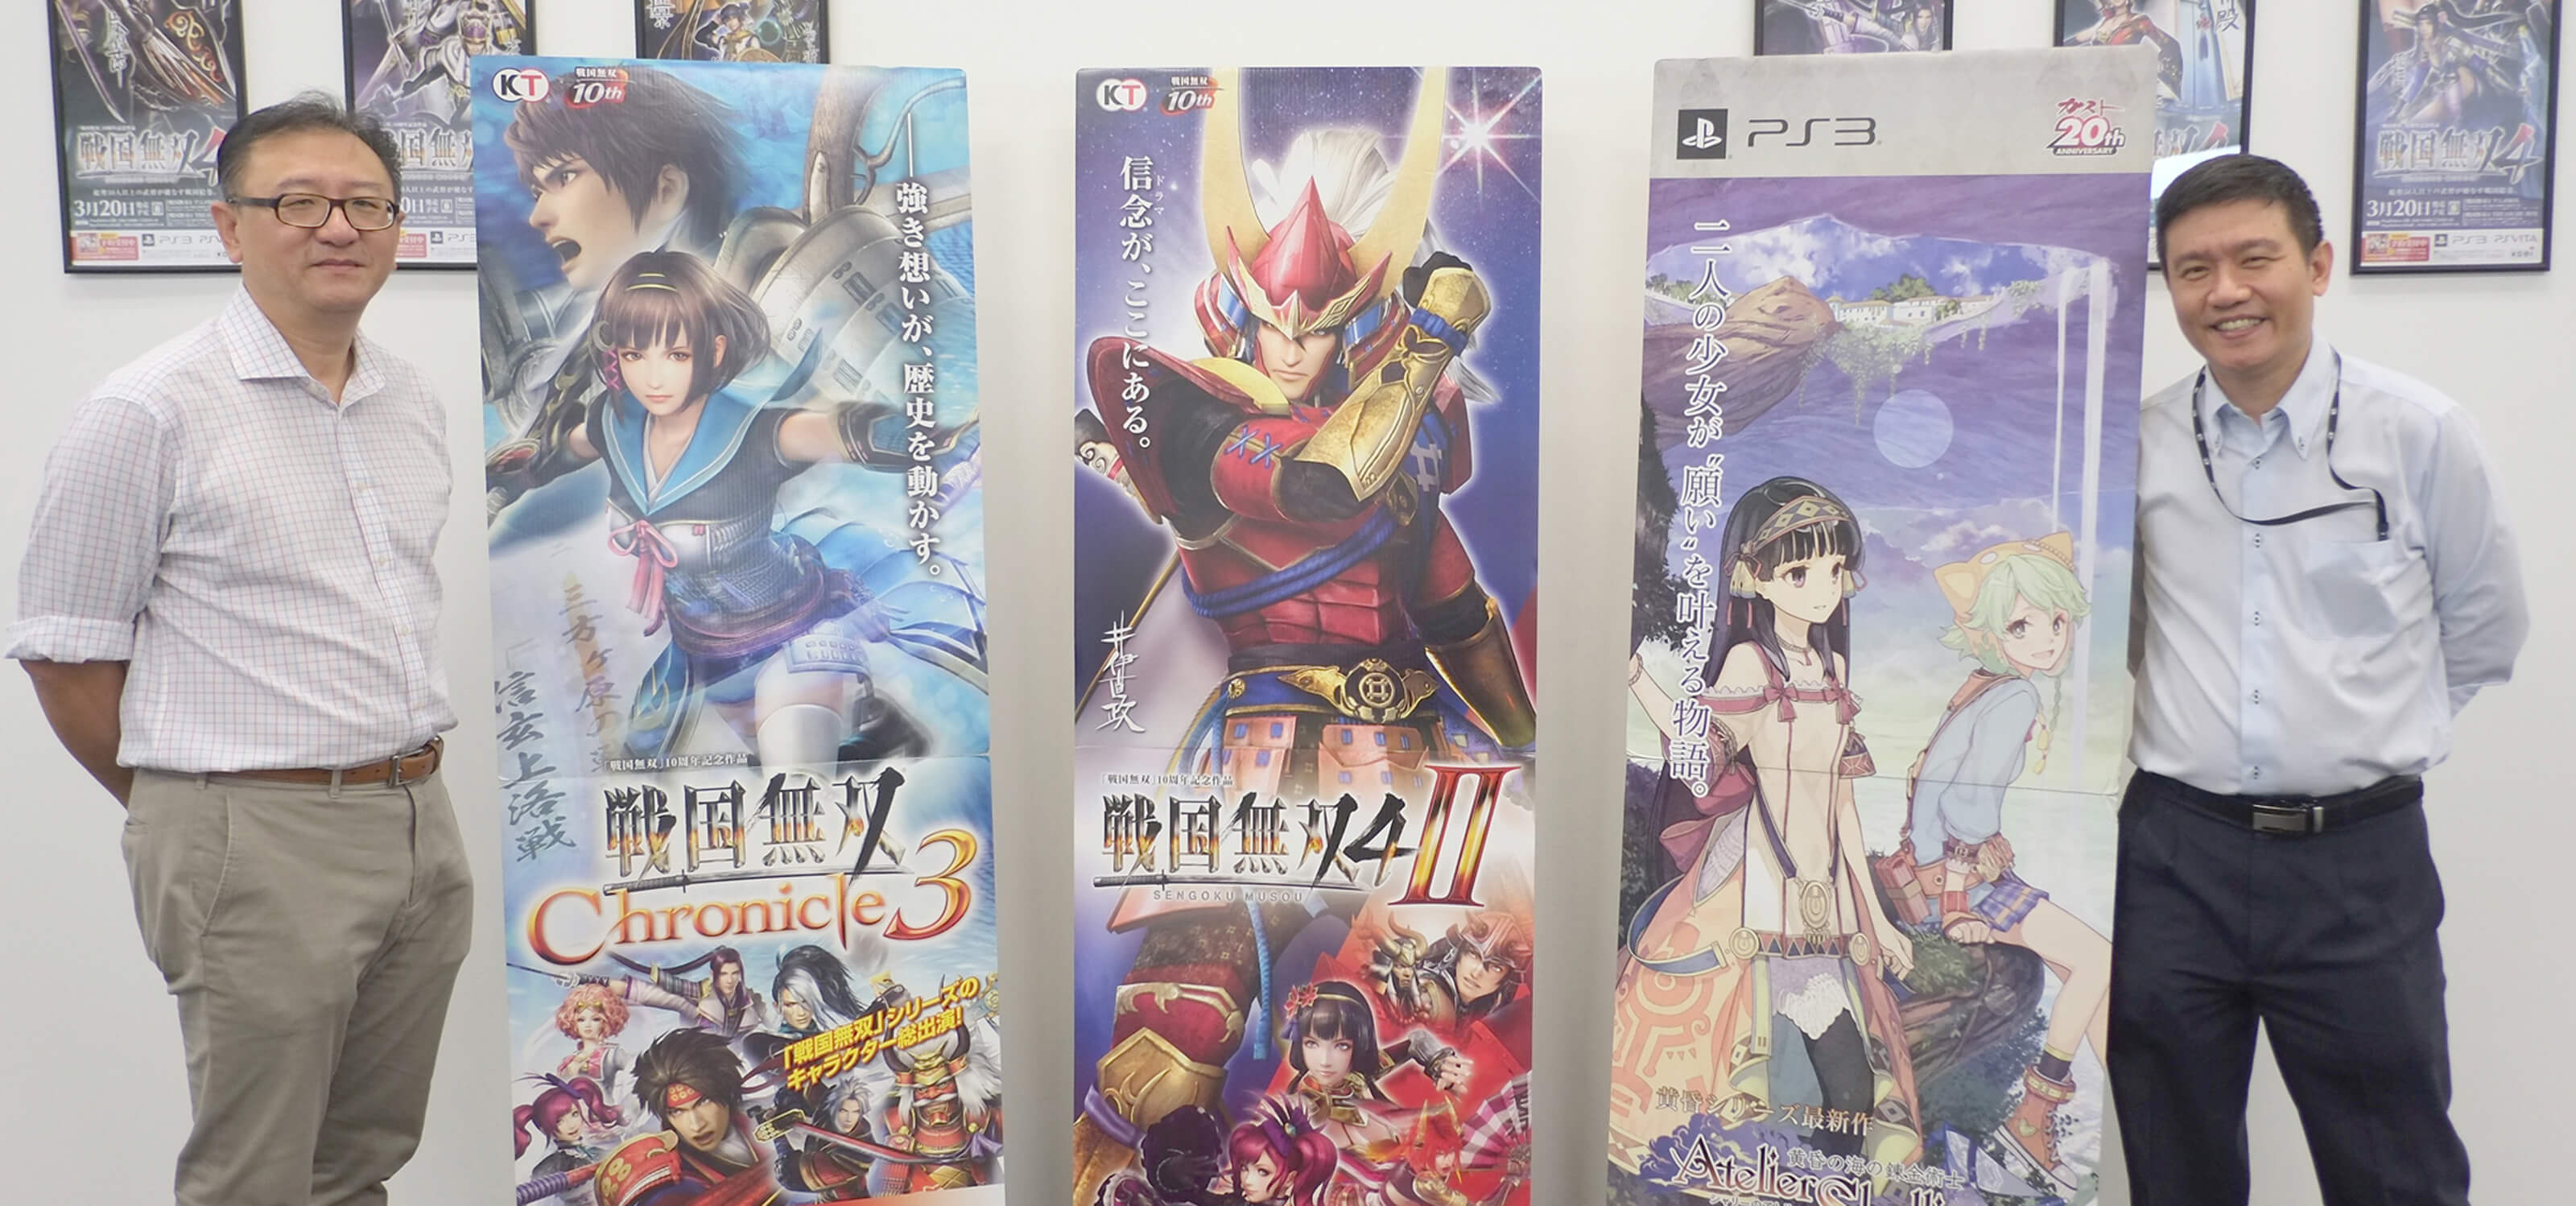 DigiPen (Singapore) representatives stand with vertical banners displaying Koei Tecmo video game titles